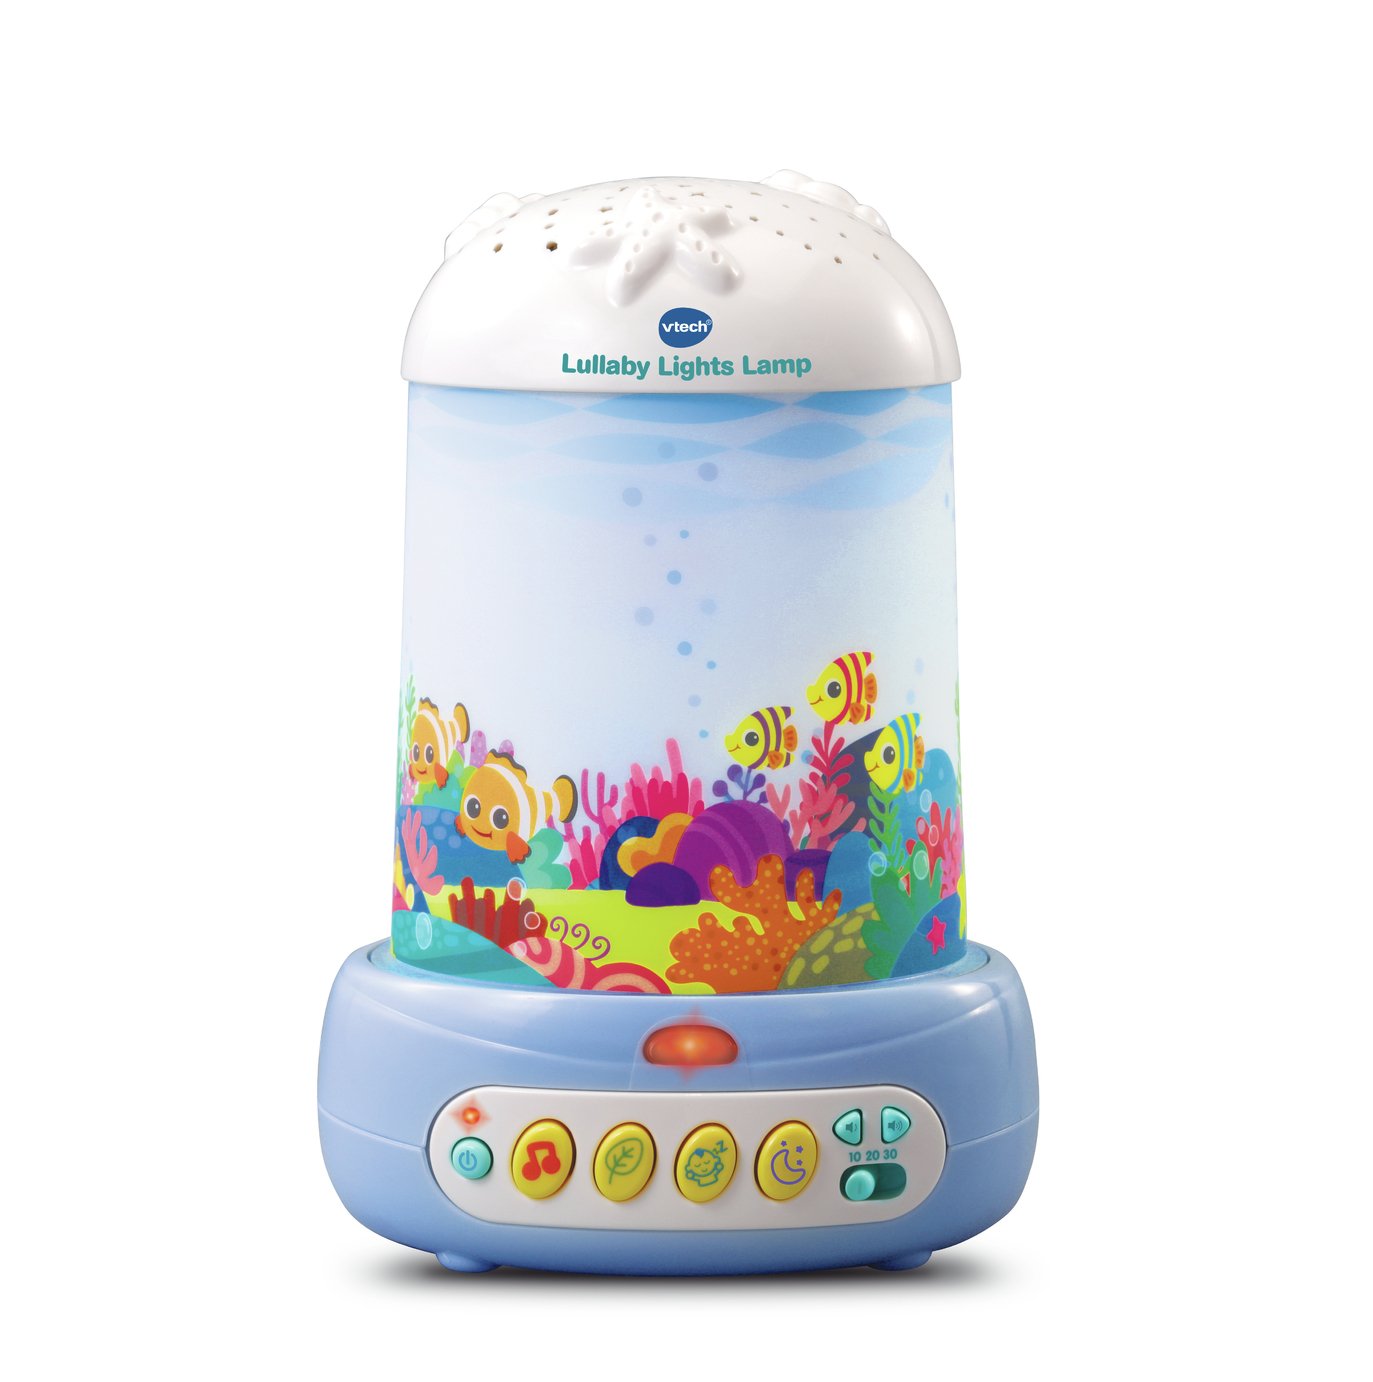 VTech Lullaby Lights Lamp Review